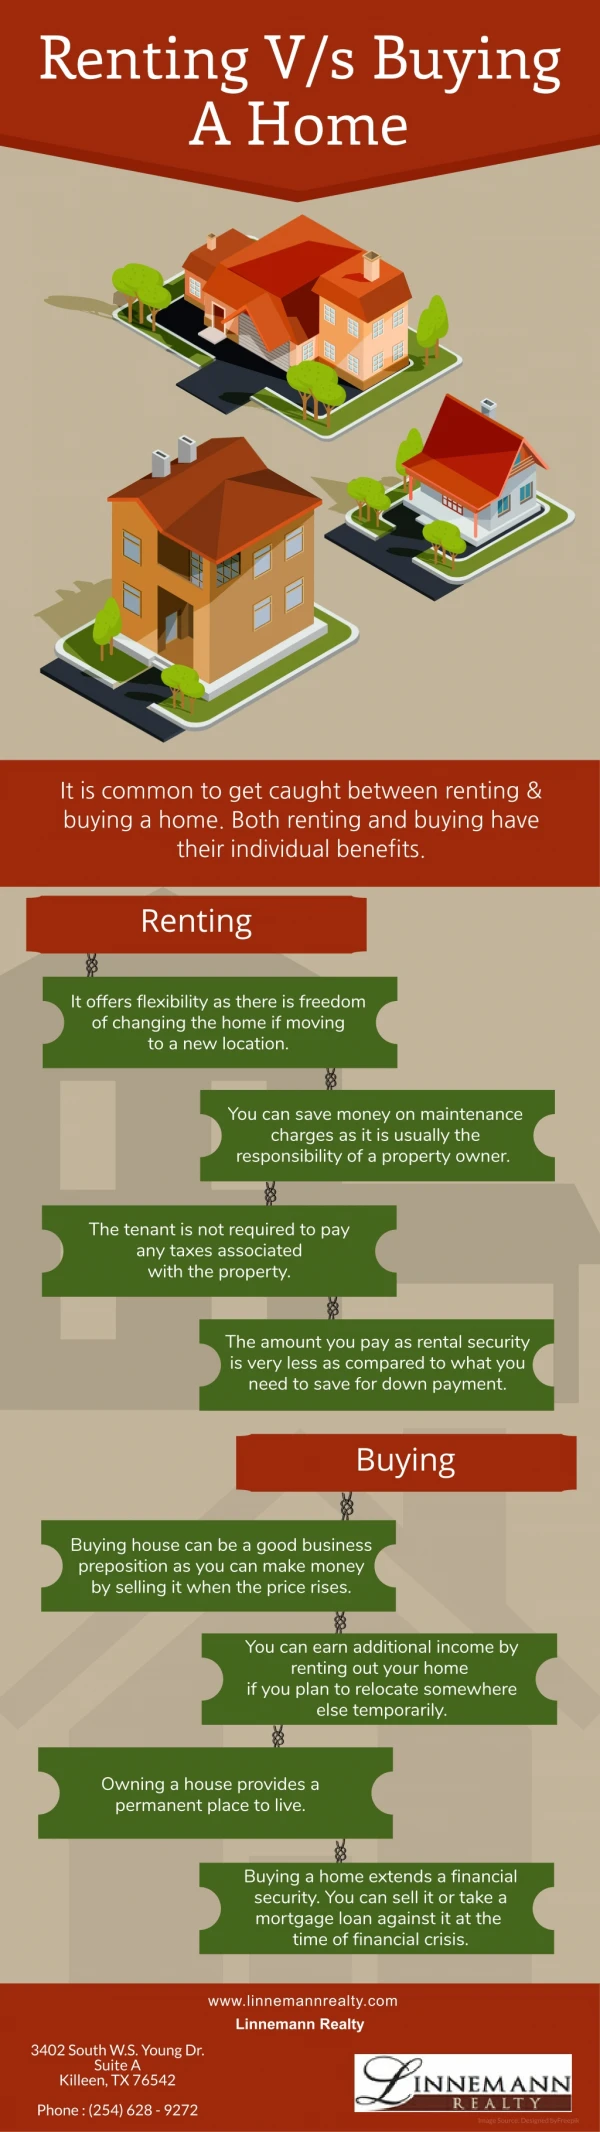 Renting V/s Buying A Home